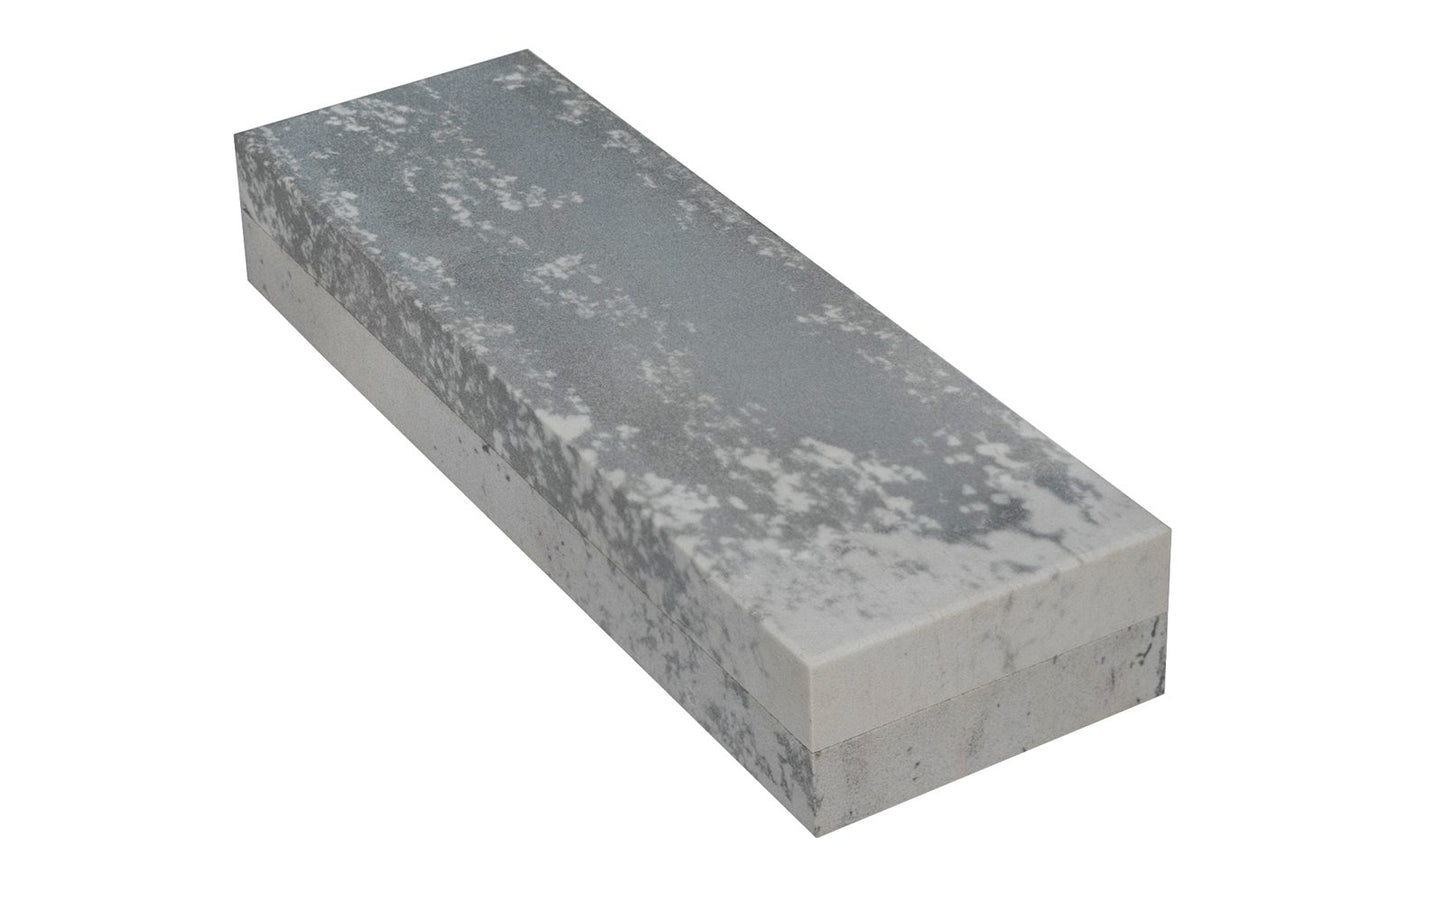 Soft/Hard Combination Arkansas Bench Stone with Wooden Box ~ 6" x 2" x 1" - Made in USA ~ Combo Hard & Soft Arkansas Stone Kit - Soft Arkansas: Extra-fine stone is good for starting an edge on tools - Hard Arkansas: Super-fine stone that is satisfactory for the final edge - Model No. MFC-6-C